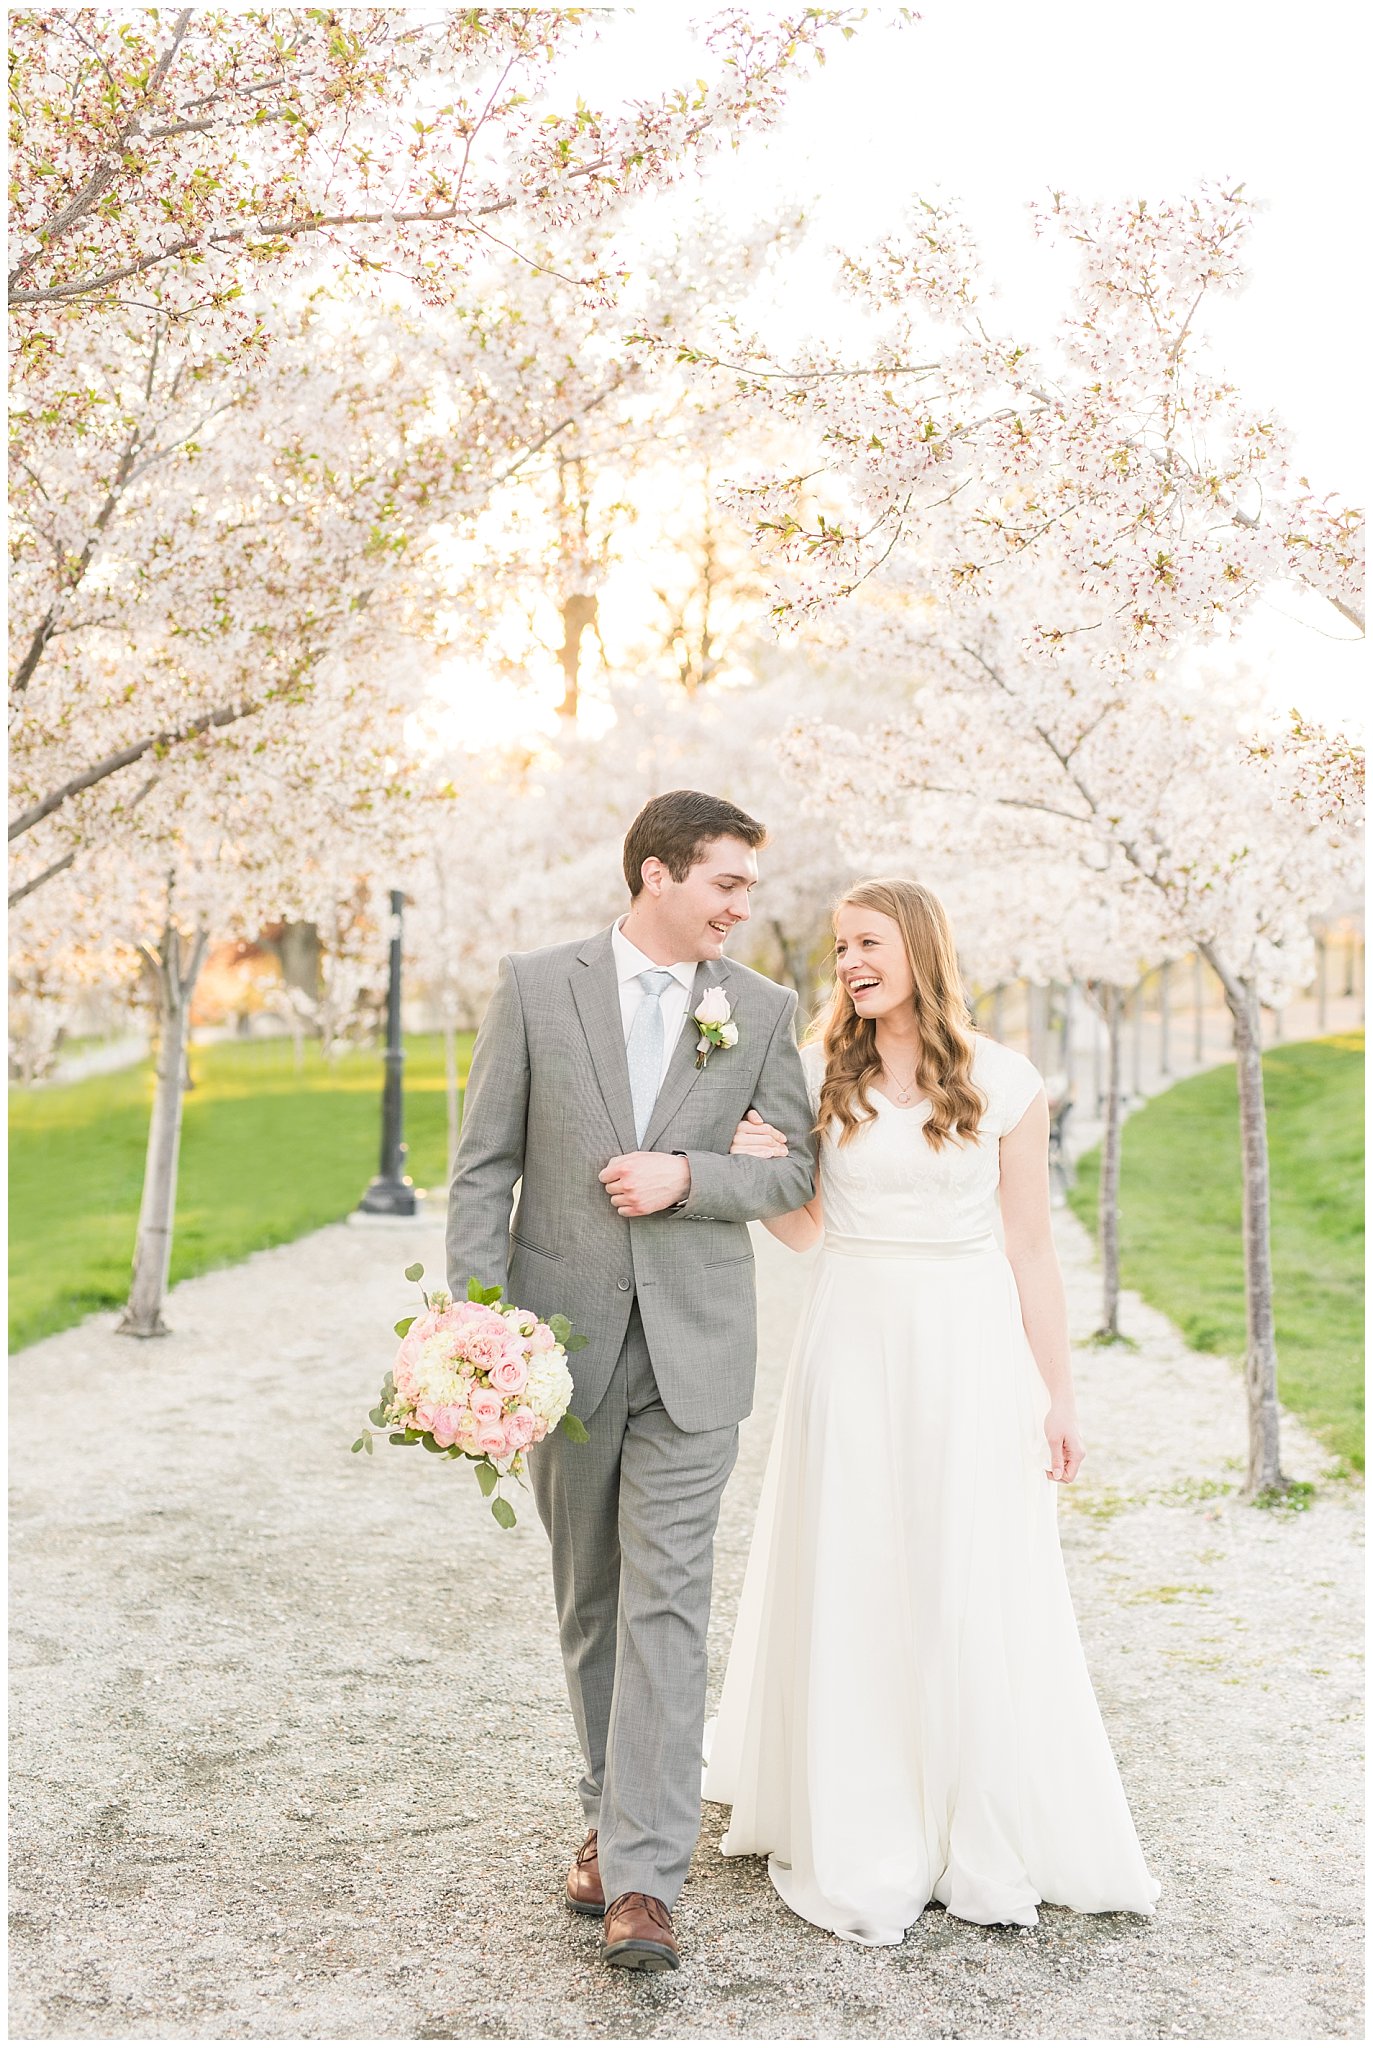 Walking bride with blush bouquet and groom with grey suit in the cherry blossoms | Utah State Capitol Blossoms Formal Session | Salt Lake Wedding Photographers | Jessie and Dallin Photography